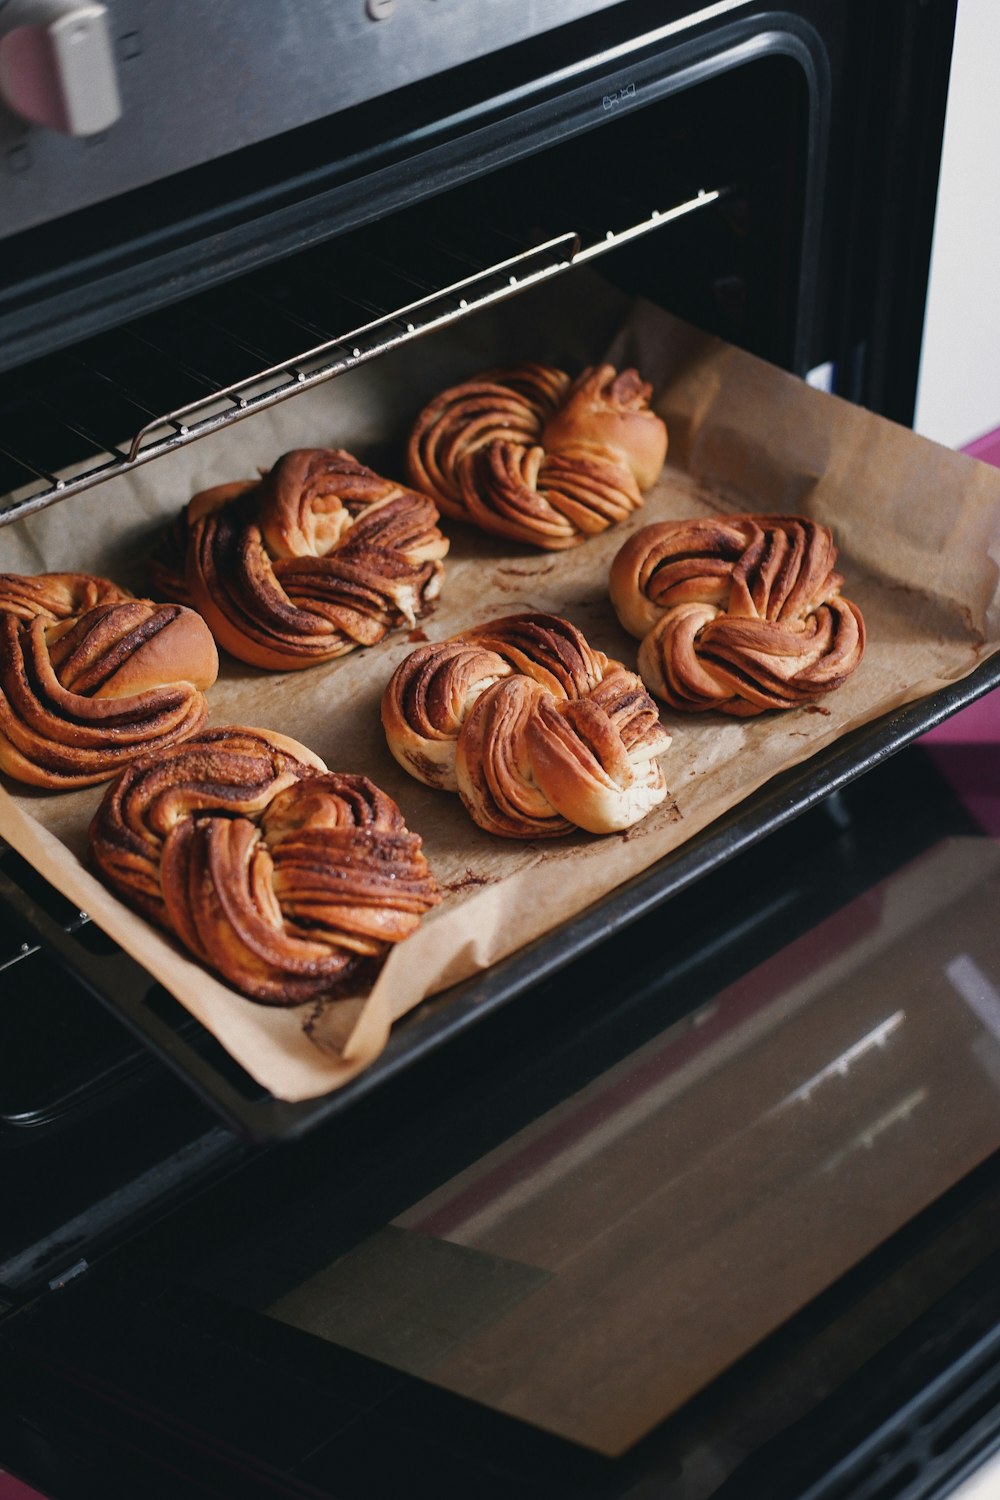 a tray of freshly baked pastries in an oven